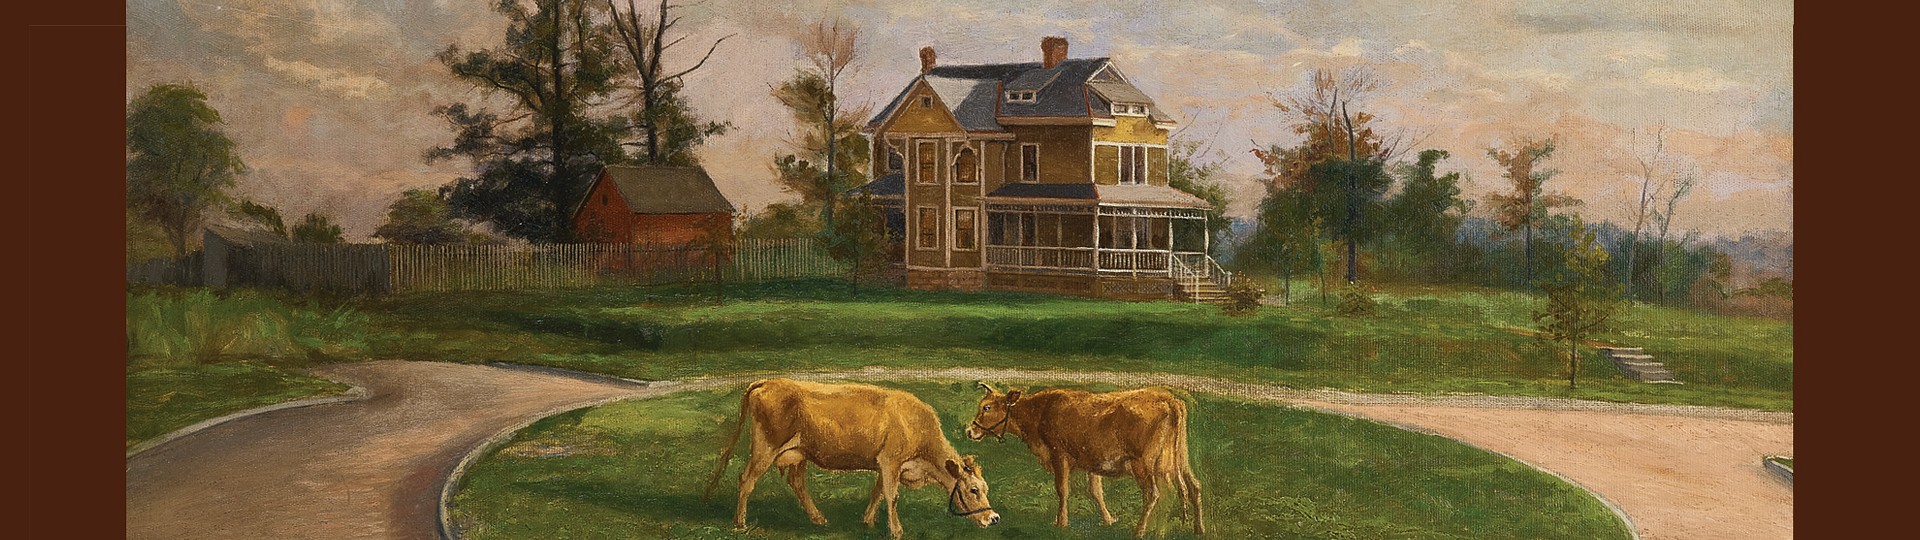 Americana, Antiques & Fine Art   Discovery Auction -Online Only by New England Auctions